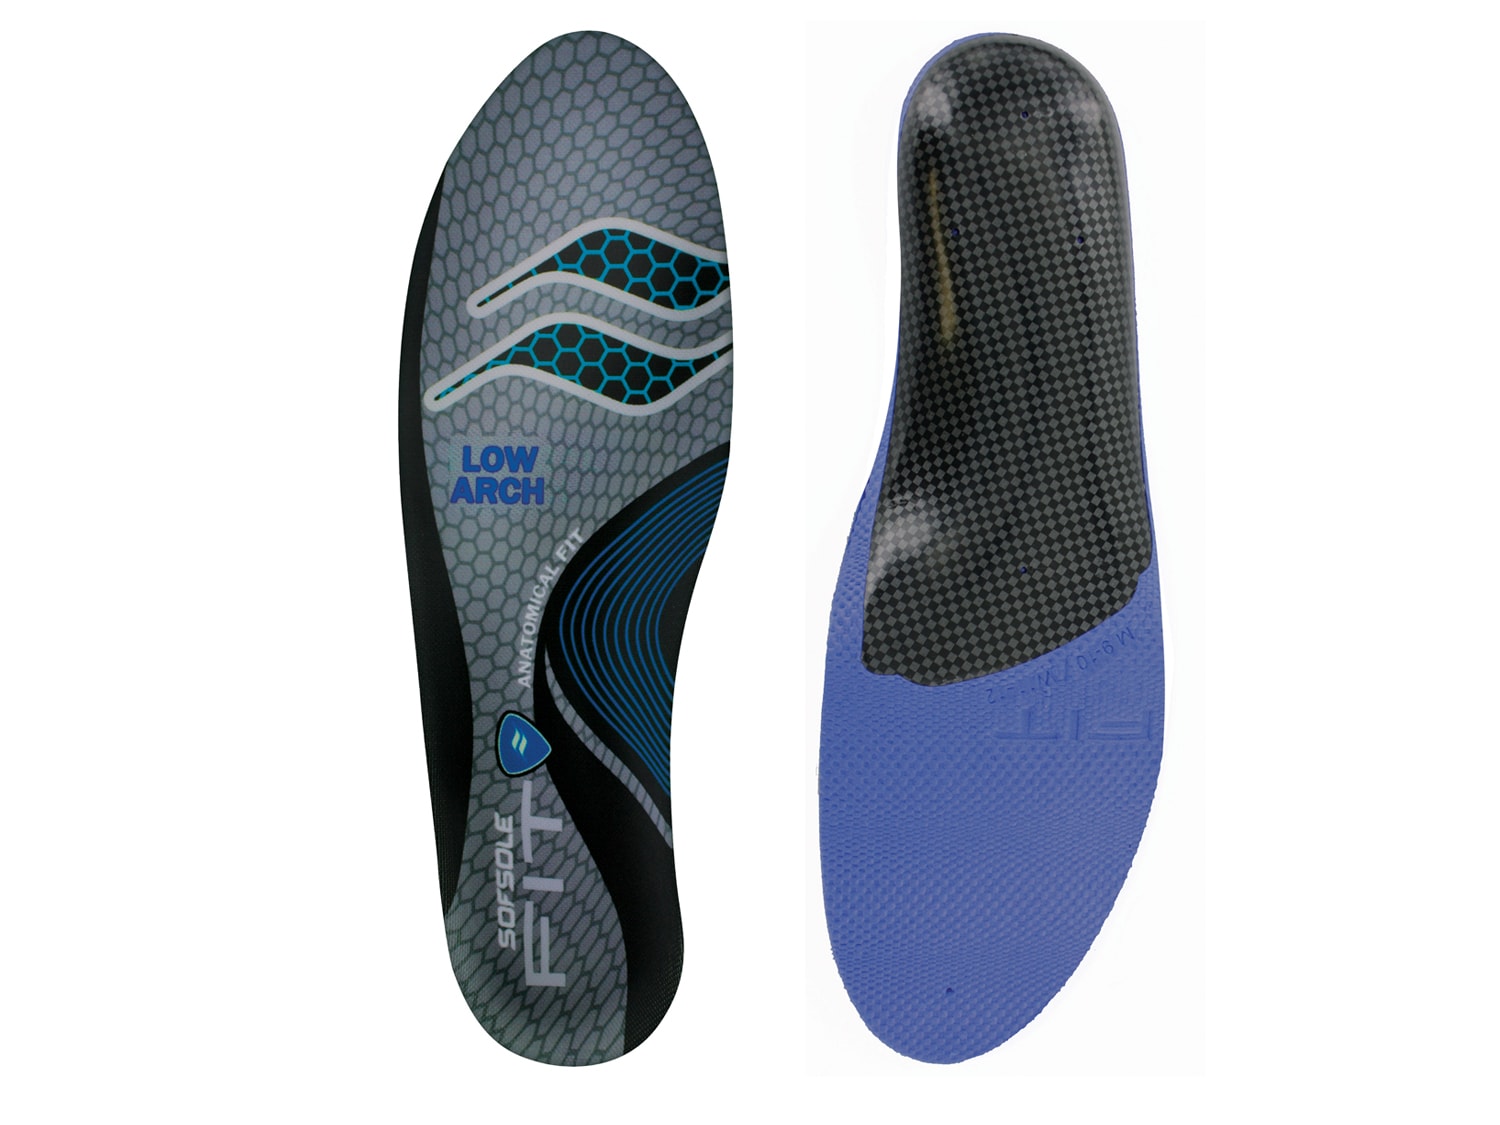 Sof Sole FIT Low Arch Custom Women's Insole - Free Shipping | DSW